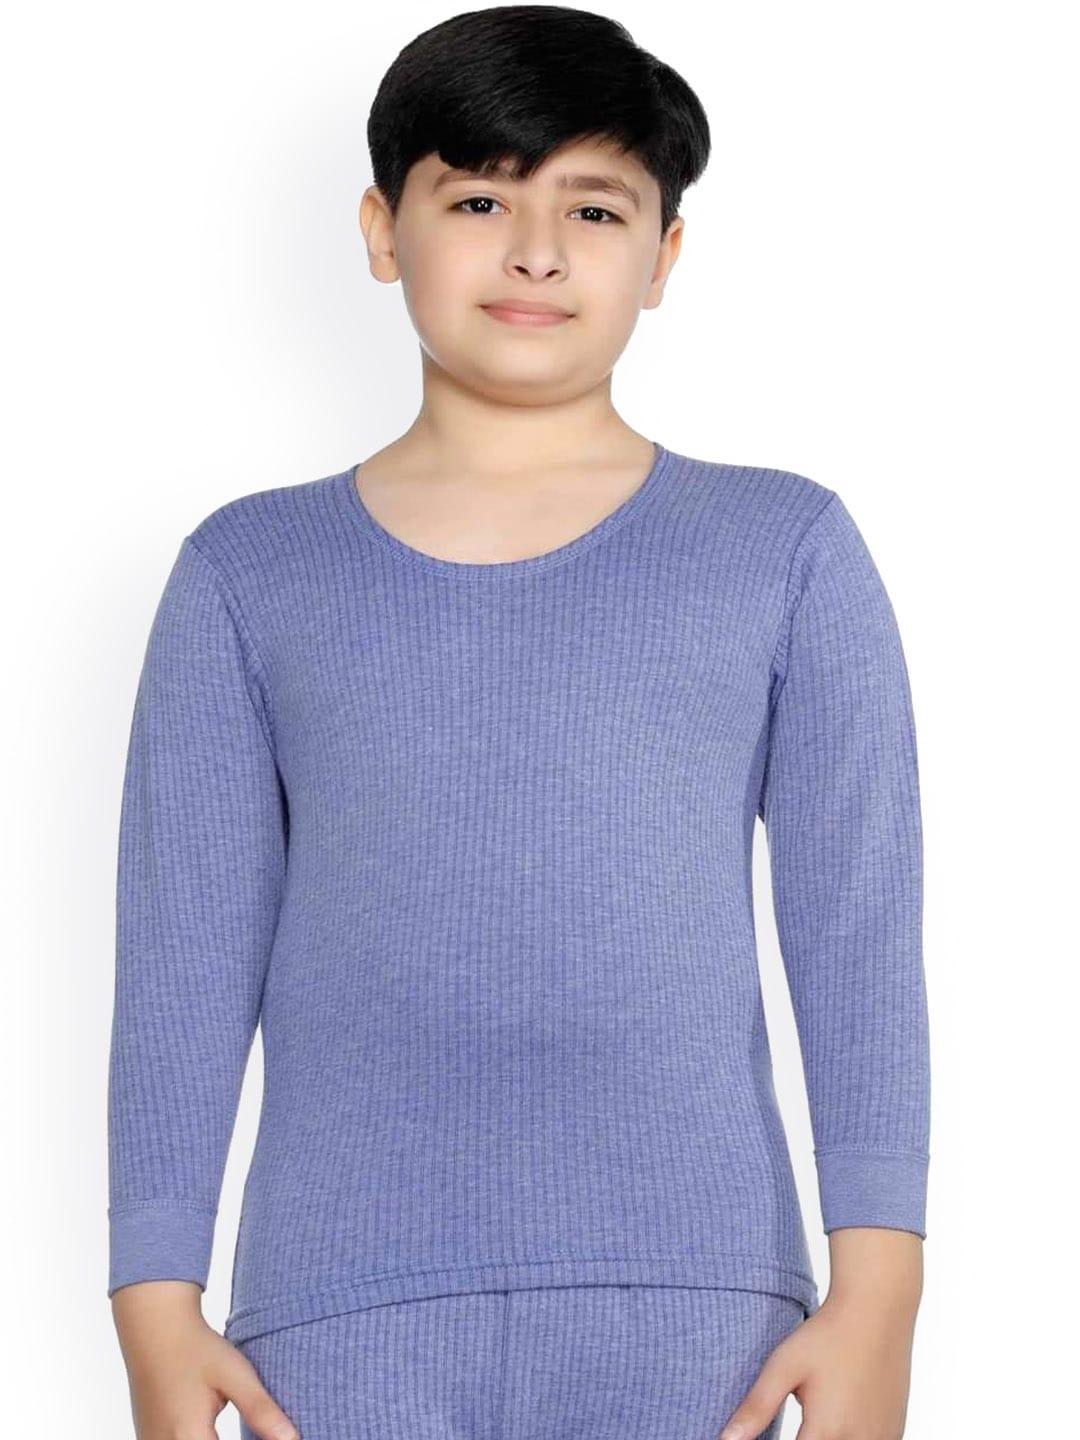 bodycare kids boys blue solid cotton thermal tops